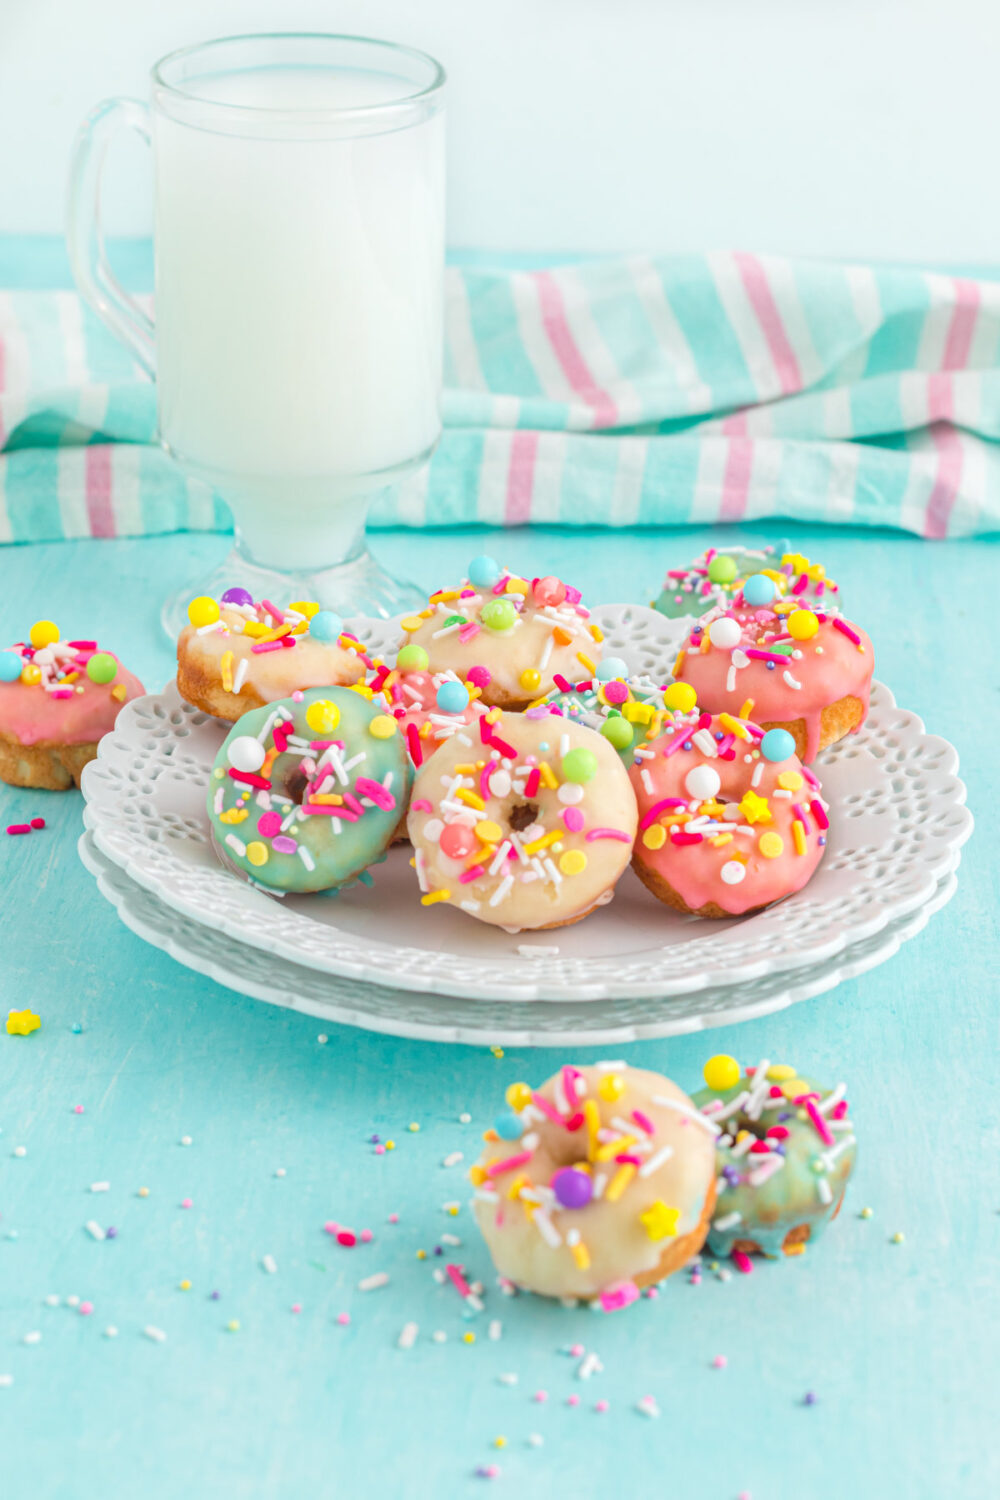 Mini donuts glazed in colors on a plate next to a glass of milk. 